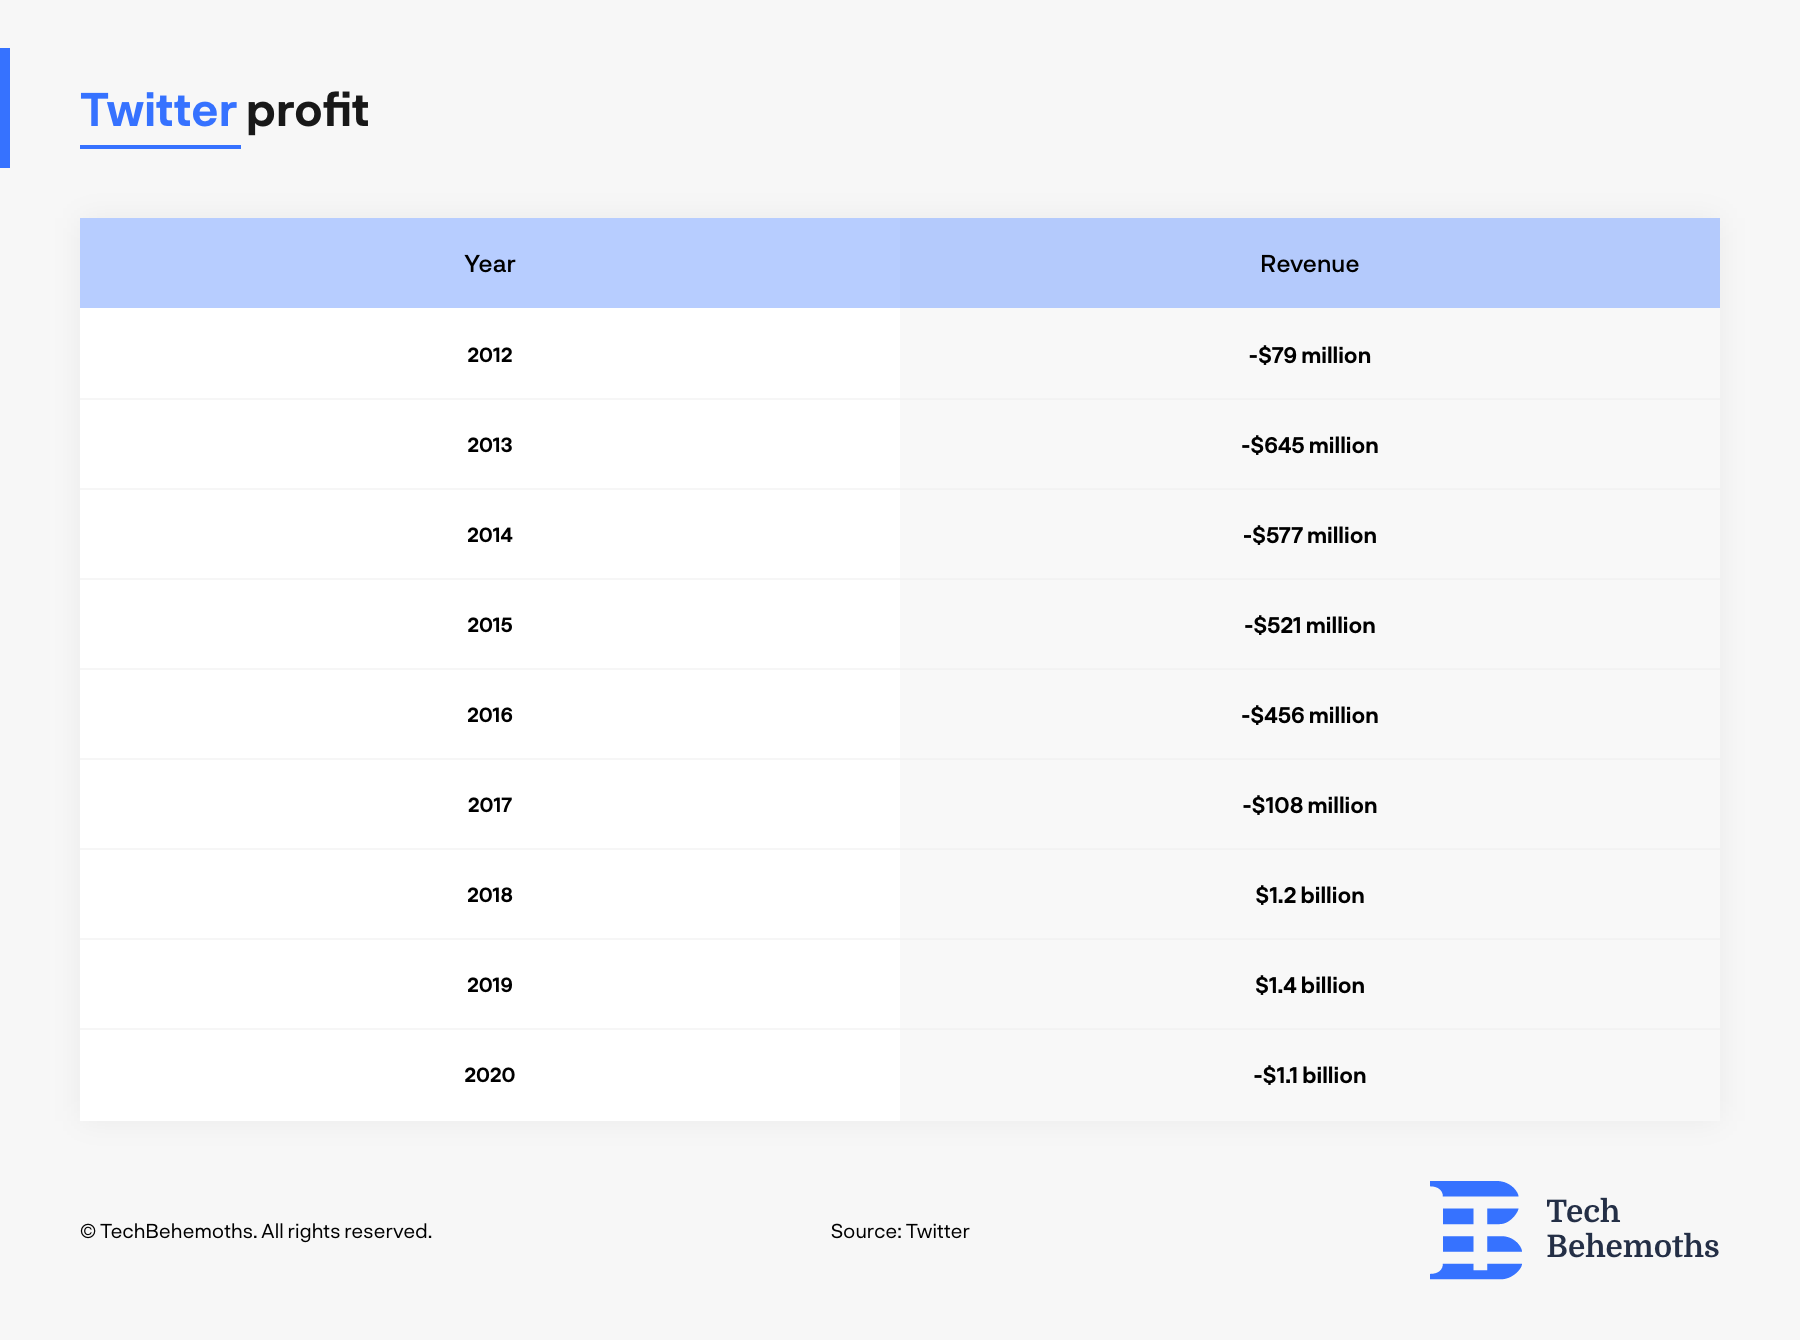 Year over year Twitter profit between 2012-2020